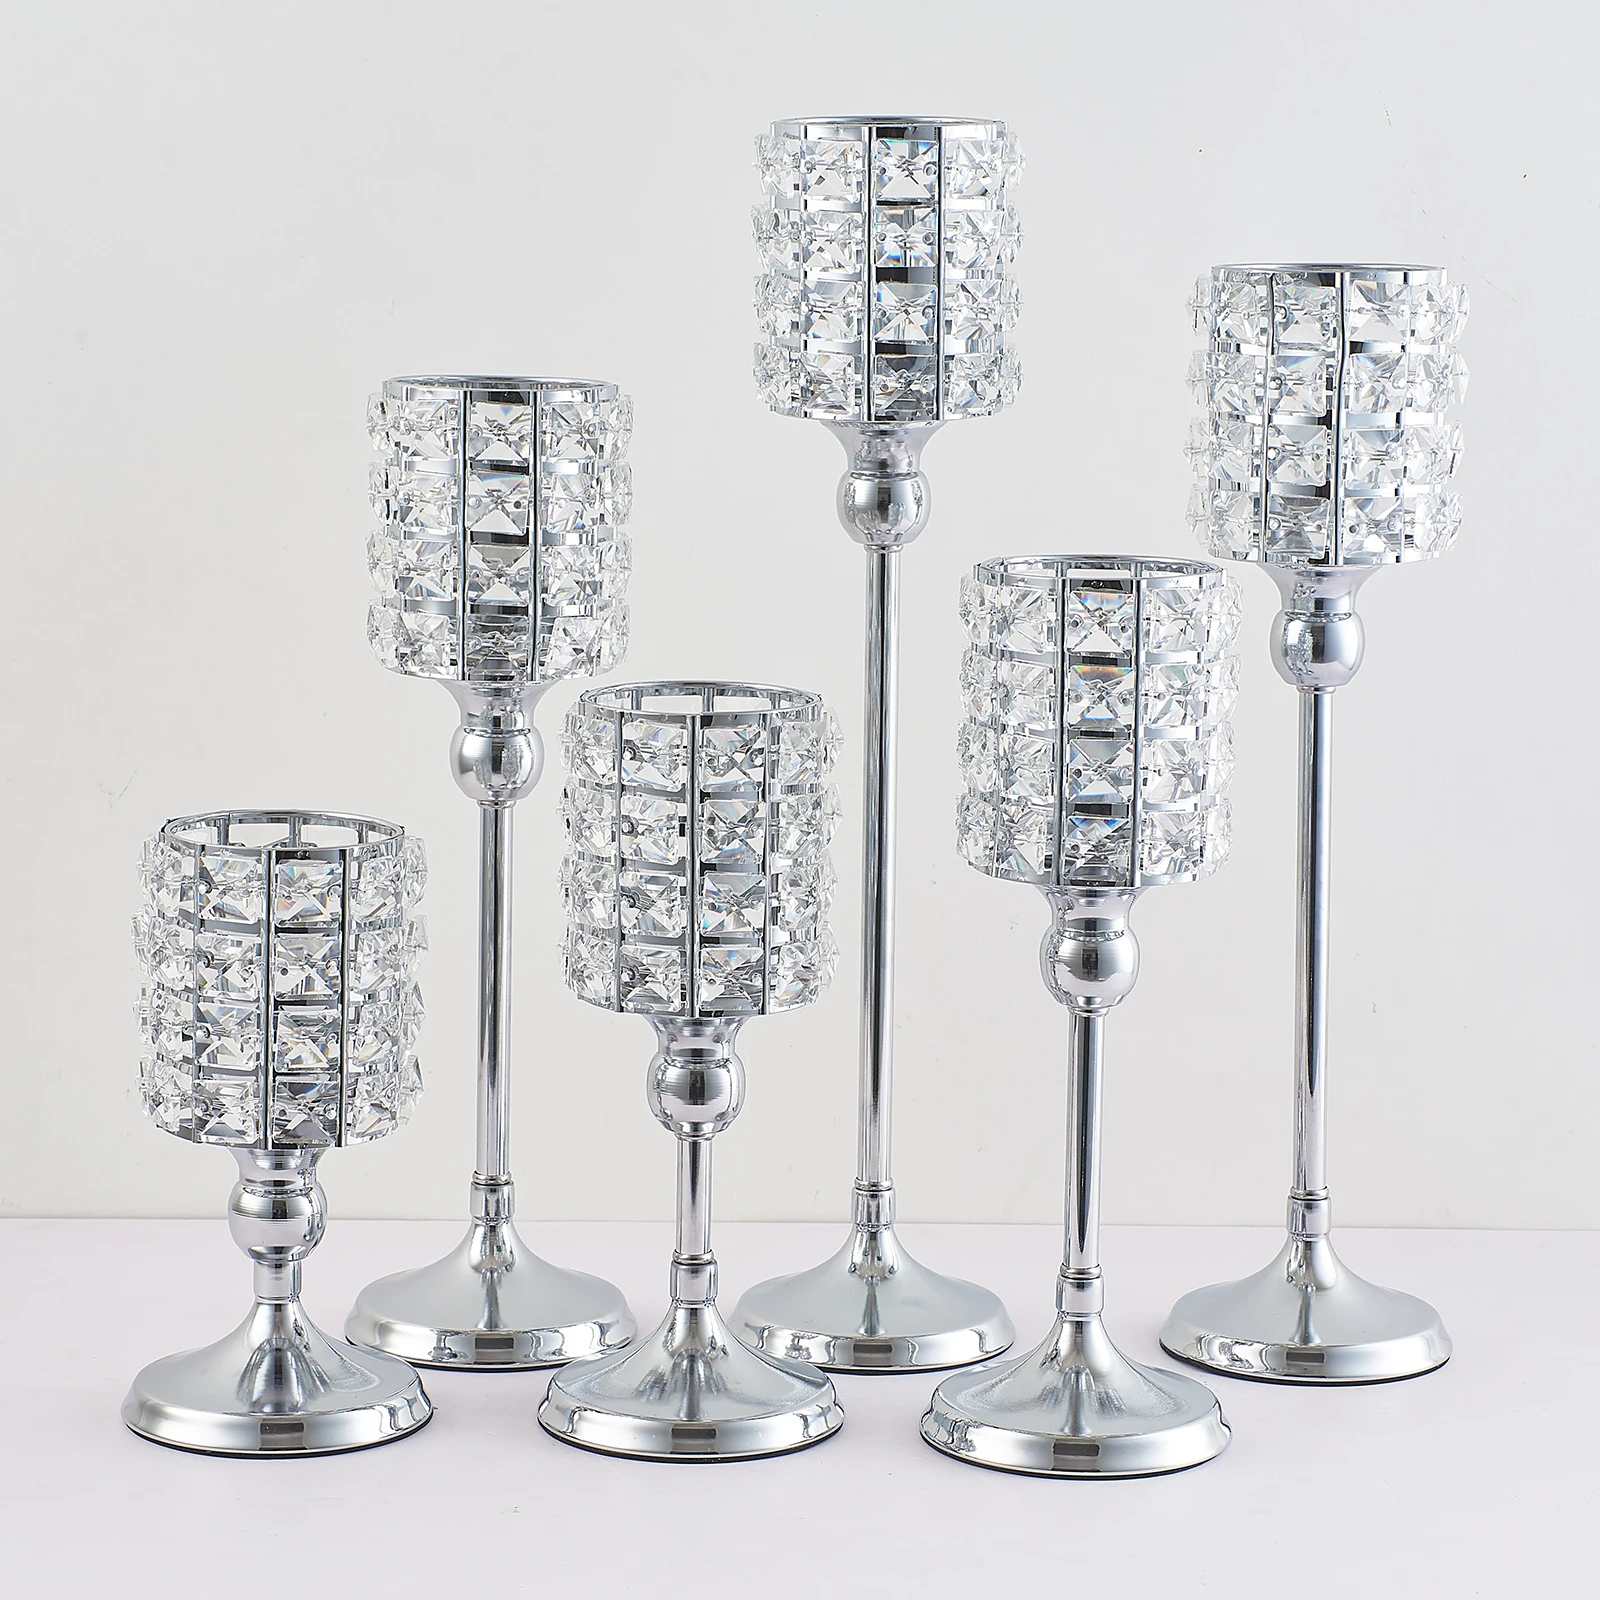 Crystal Candle Holders Centerpieces Piller Candle Mosaic Candle Holder Stand Tea Light Candlestick Holder for Table Decors